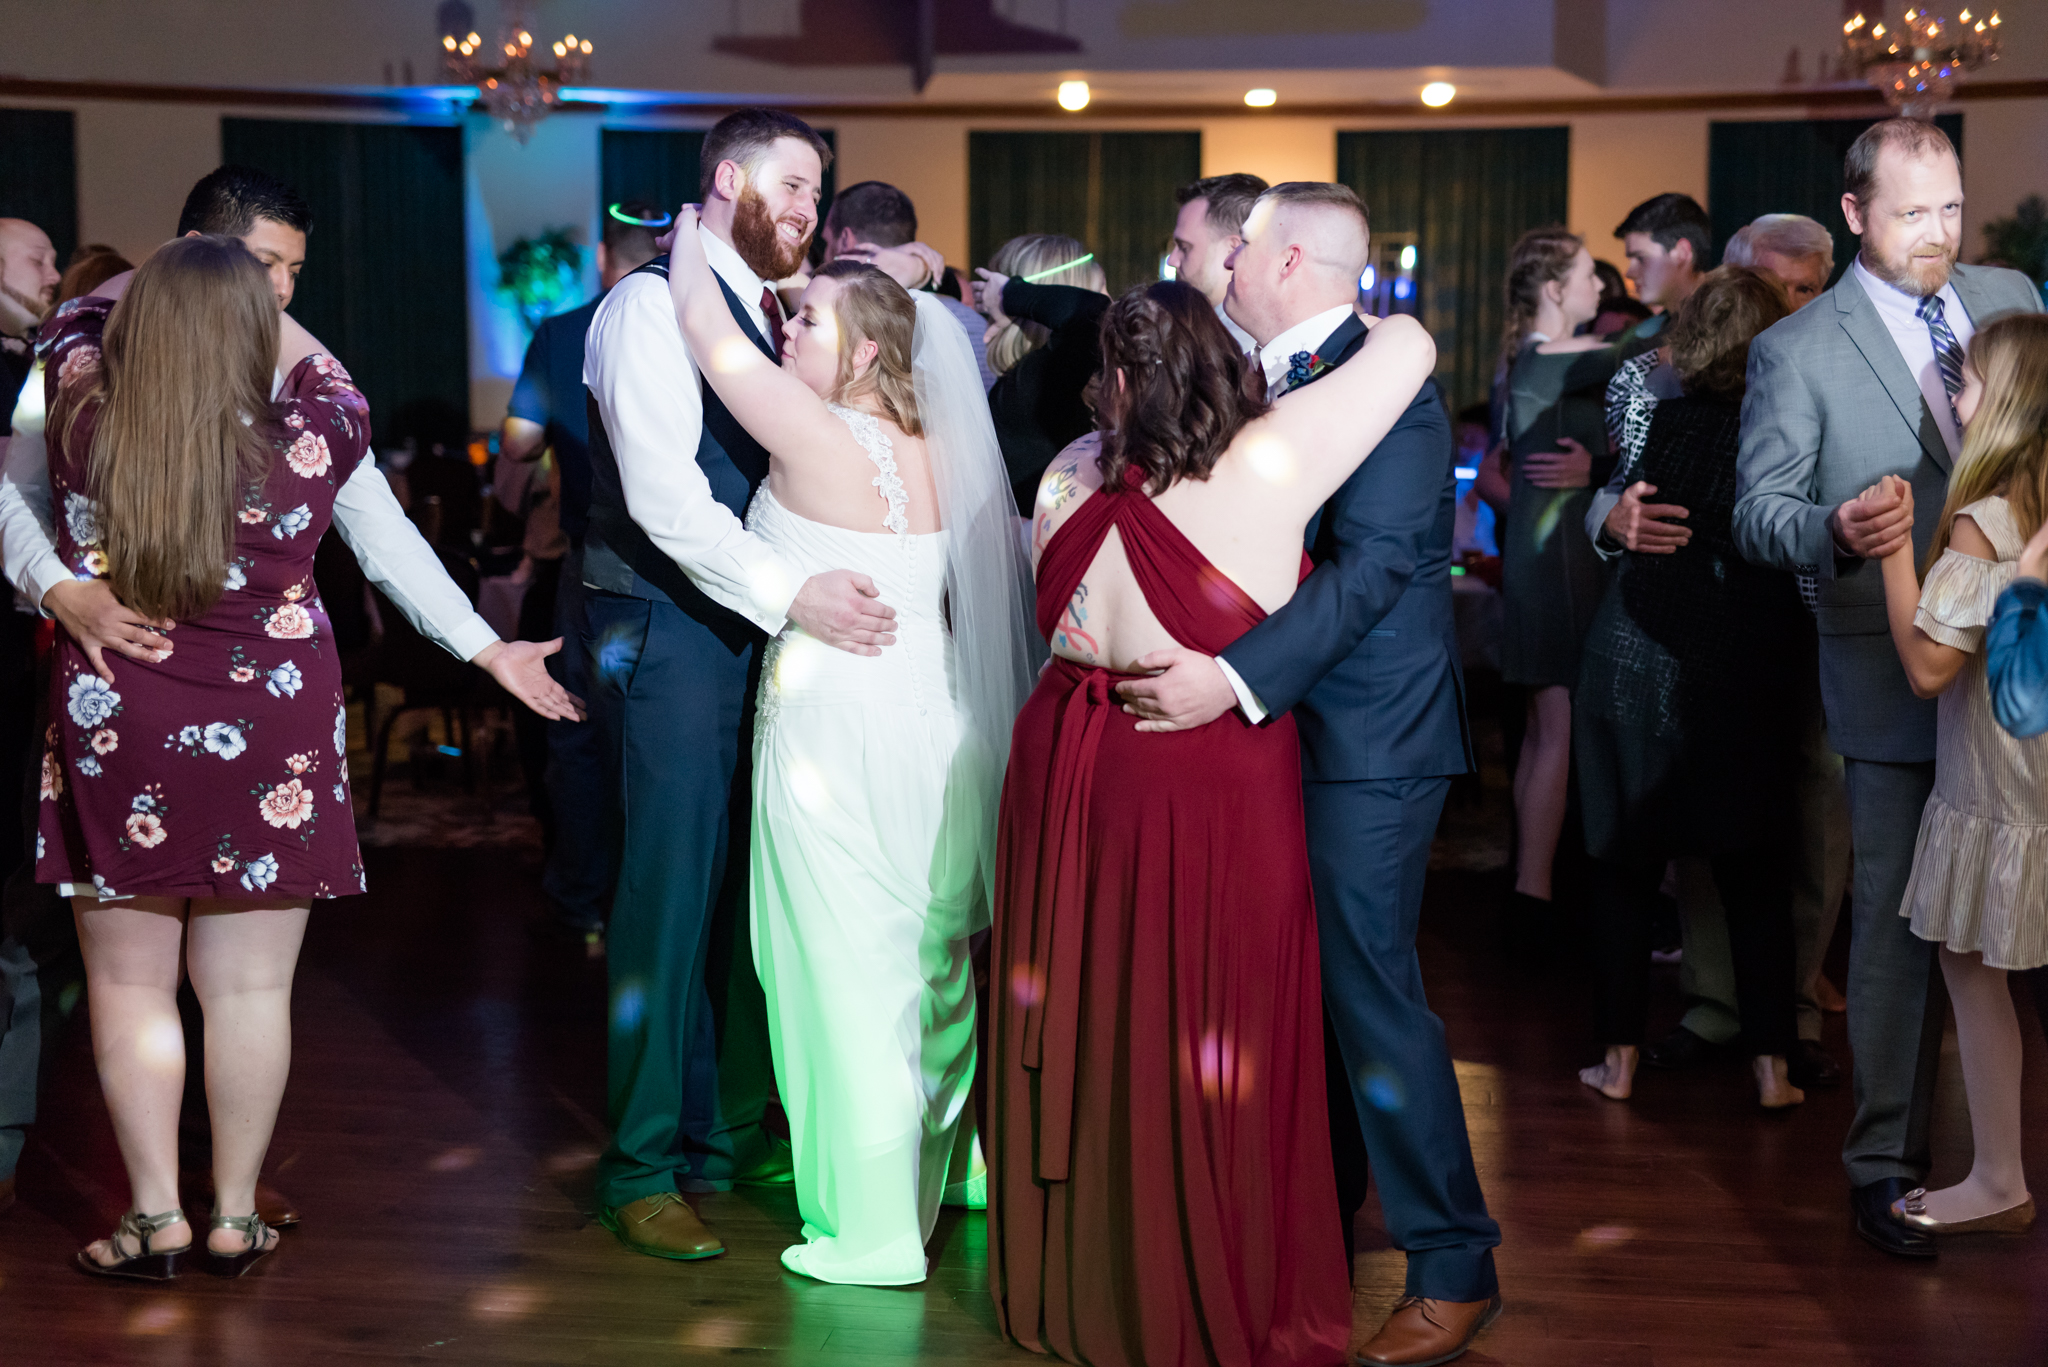 Bride and groom dance with their guests.